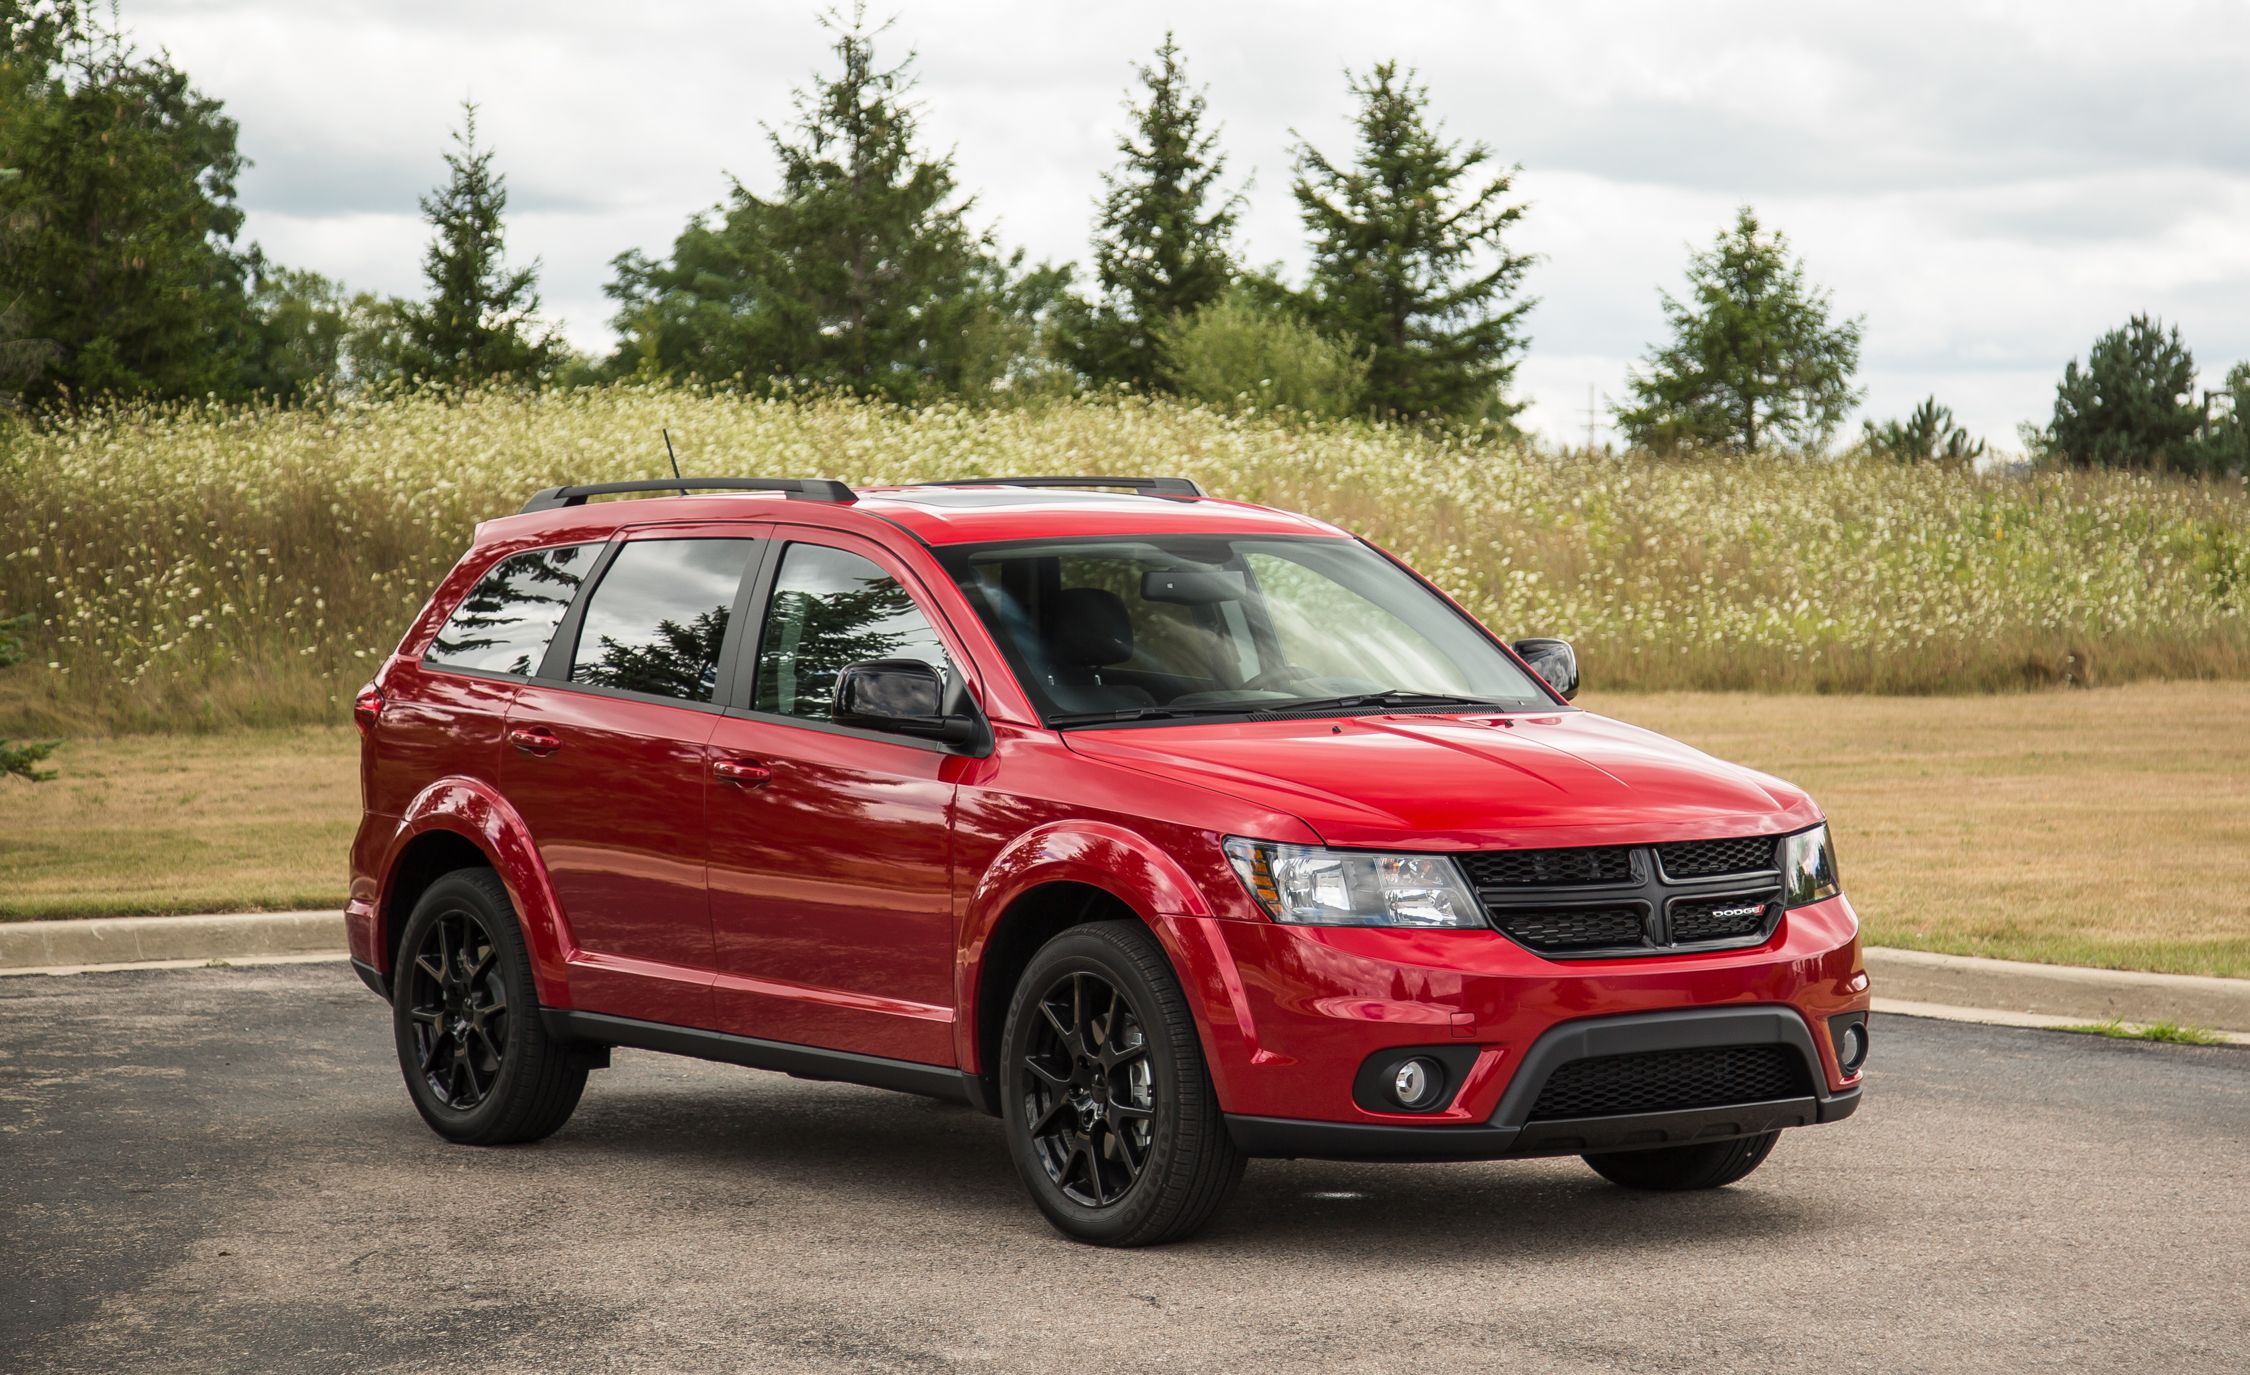 2018 Dodge Journey GT AWD 060 Times, Top Speed, Specs, Quarter Mile